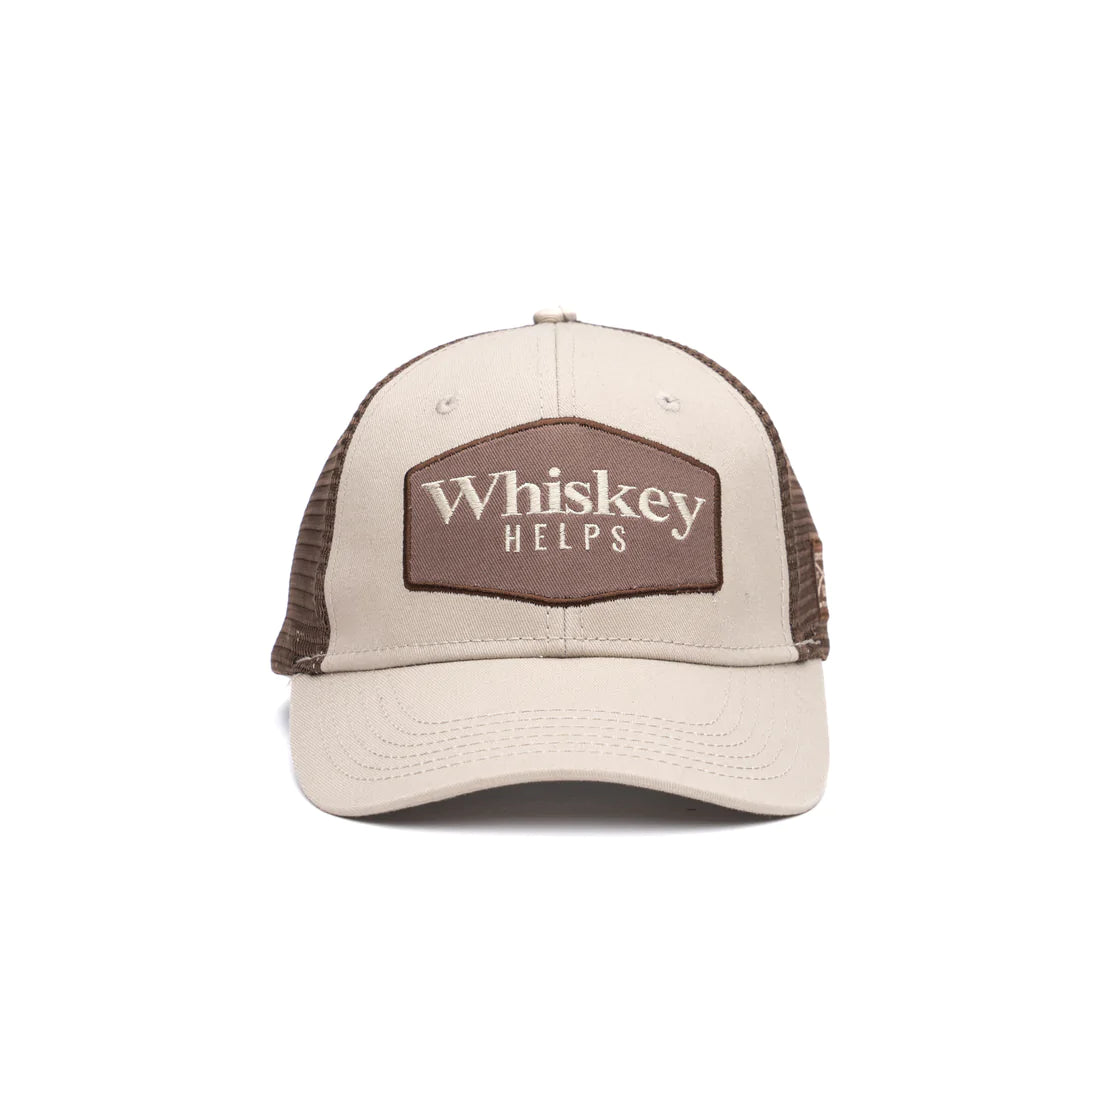 Whiskey Helps Tan Hat